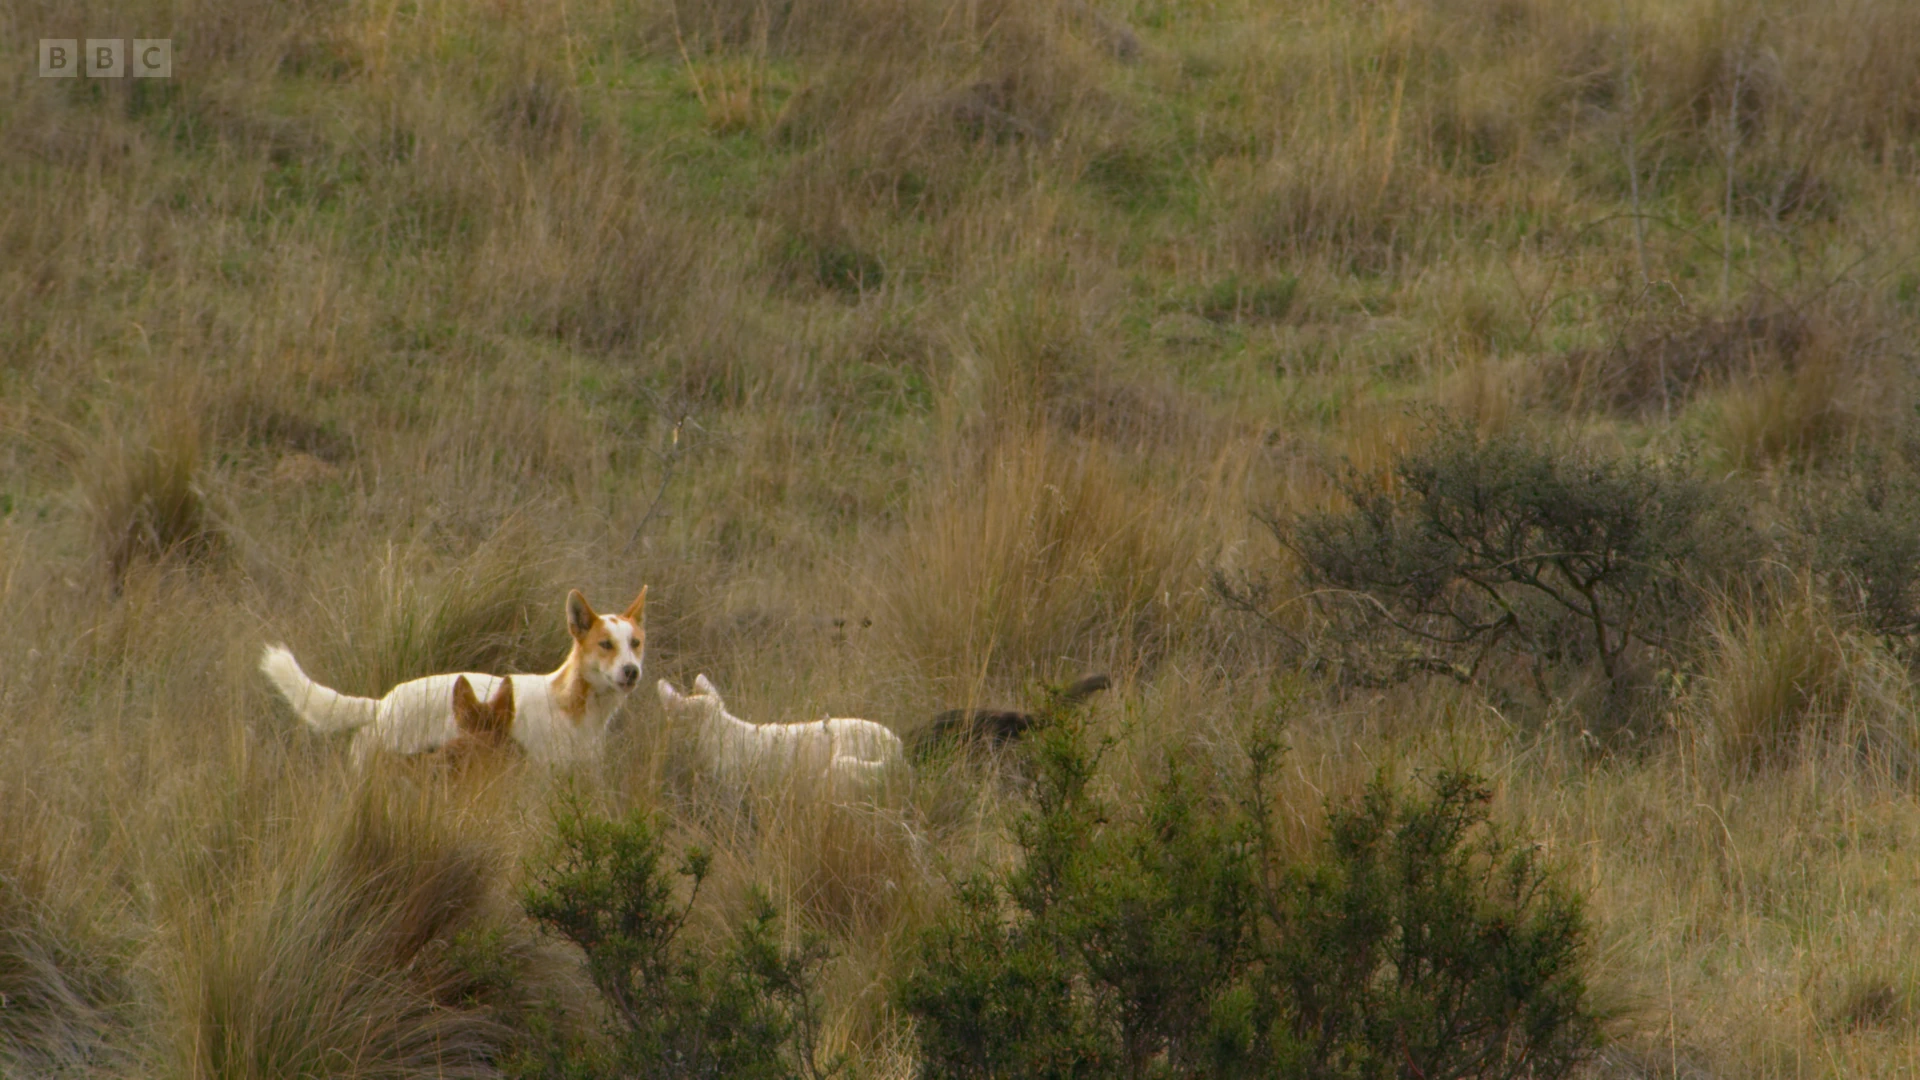 Dingo (Canis lupus dingo) as shown in Seven Worlds, One Planet - Australia